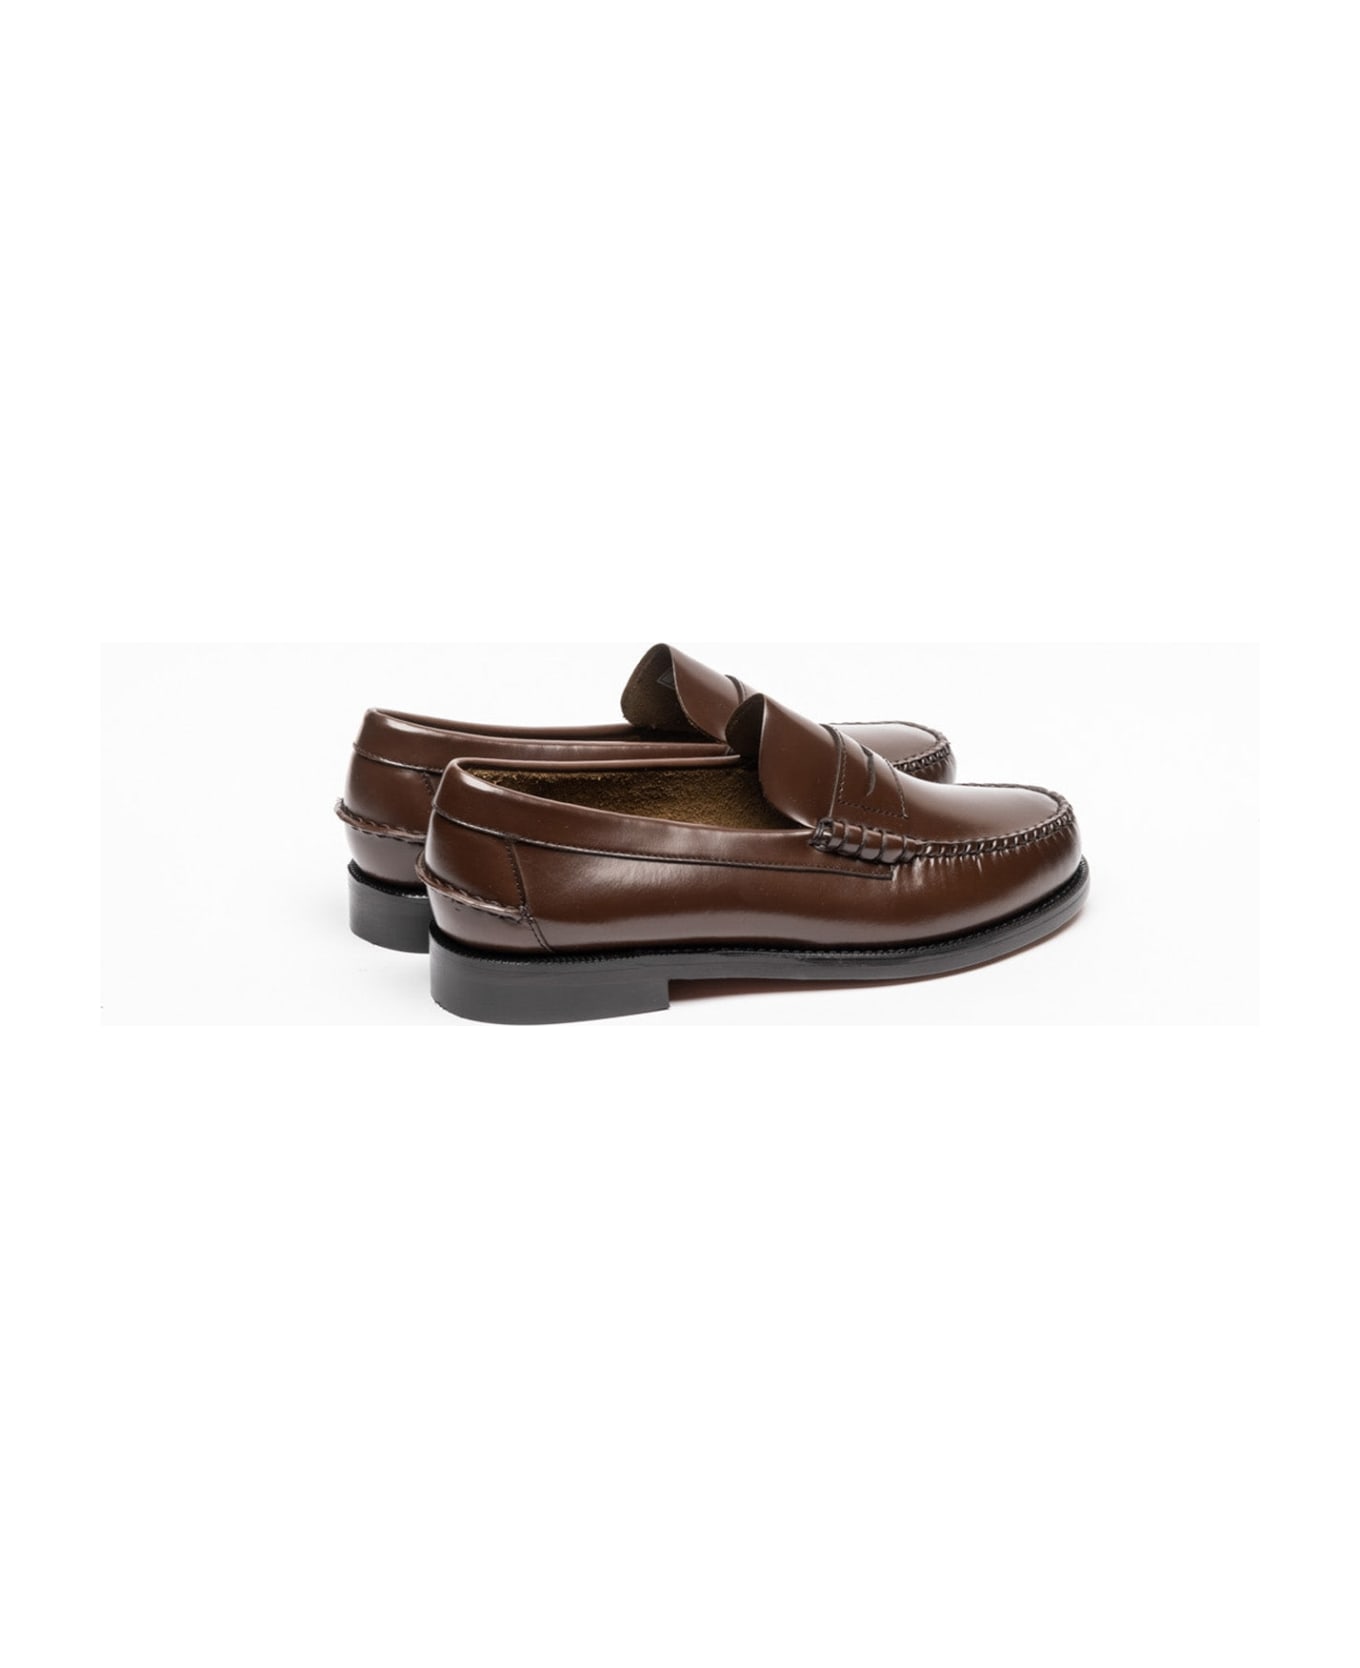 Sebago Dark Brown Brushed Leather Penny Loafer - Marrone ローファー＆デッキシューズ